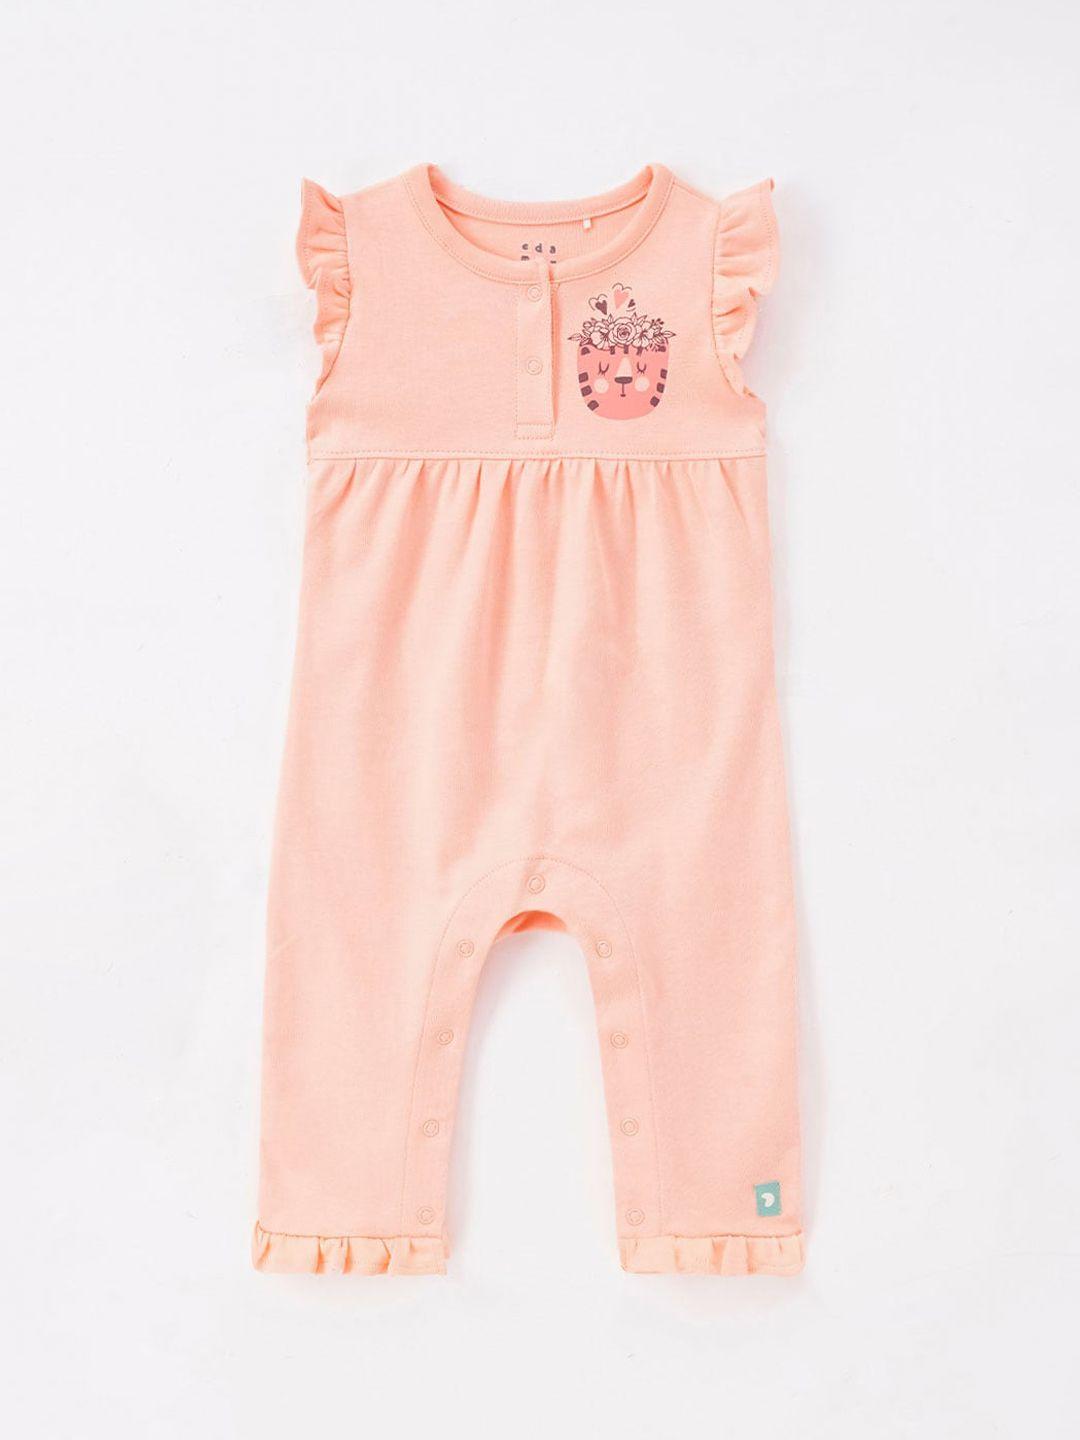 Ed-a-Mamma Baby Infant Girls Printed Cotton Rompers